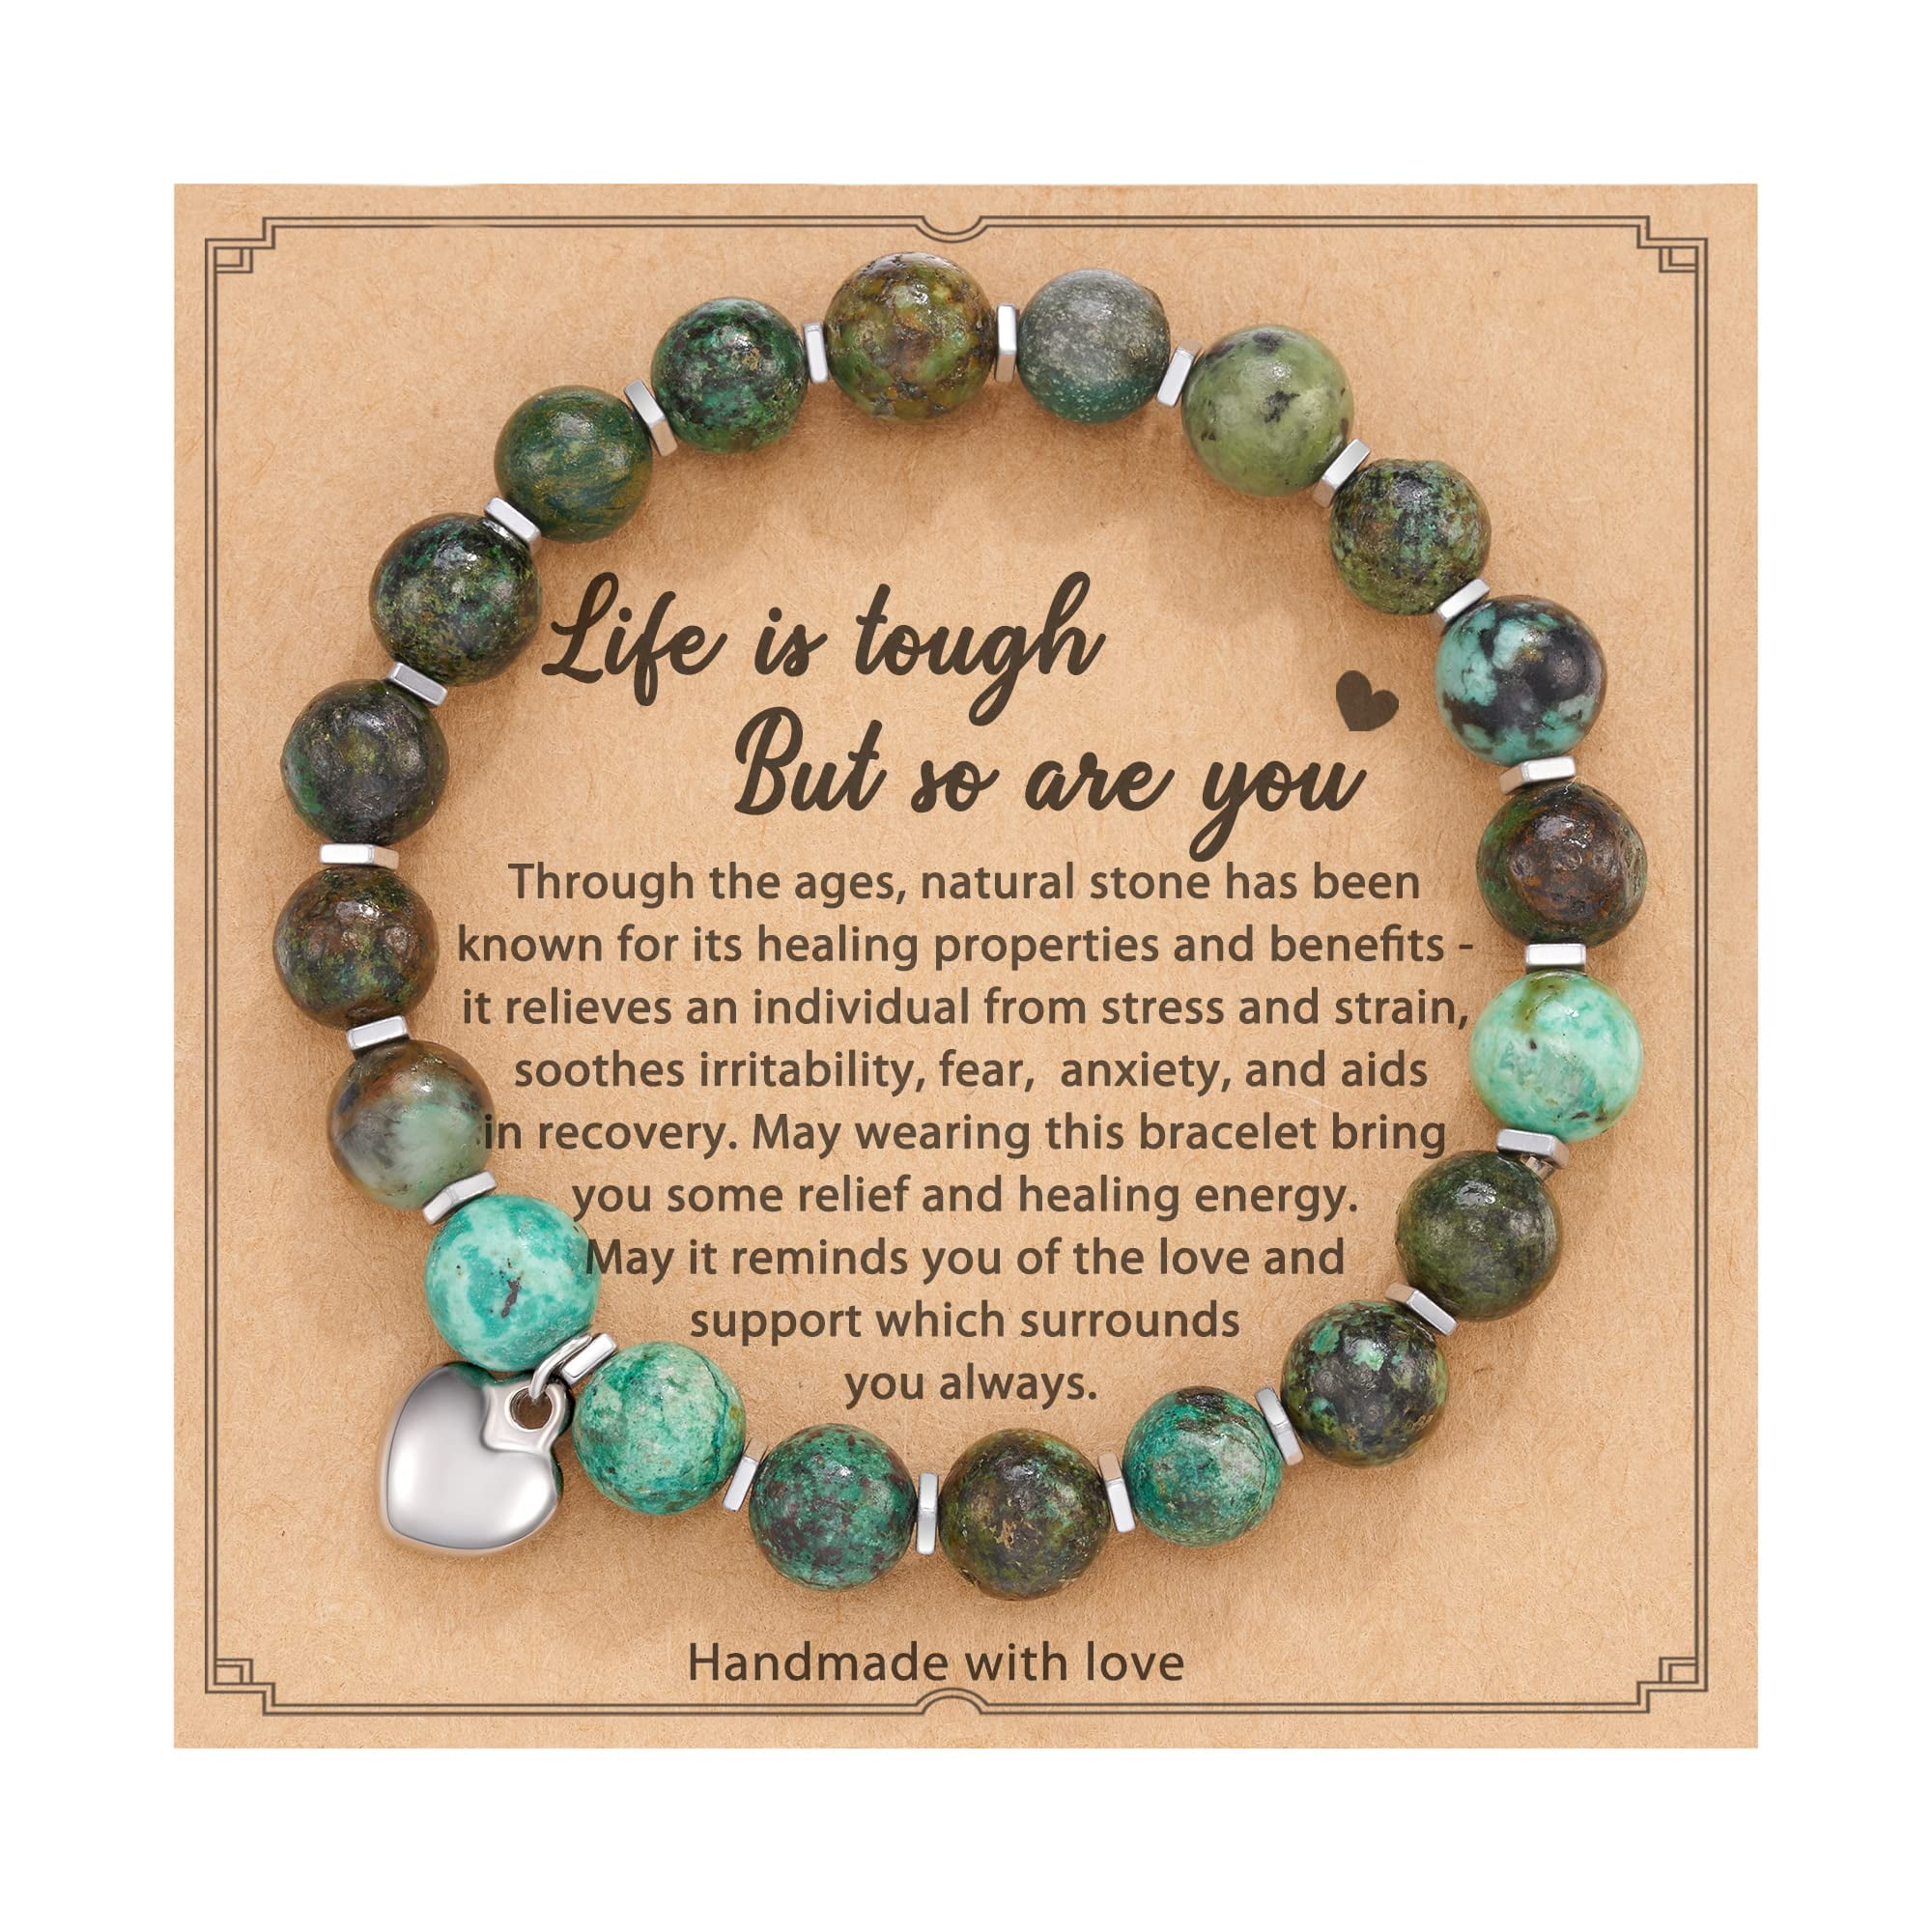 Healing Bracelet For Women Anxiety Crystal Chakra Beaded Bracelets And Stones Calming Stretch Stress Relief Gifts Women Green 2441e865 aeed 42ff be21 576c30f33f8c.b8ca45fef8bc0a2cf58fb49847a1cb58